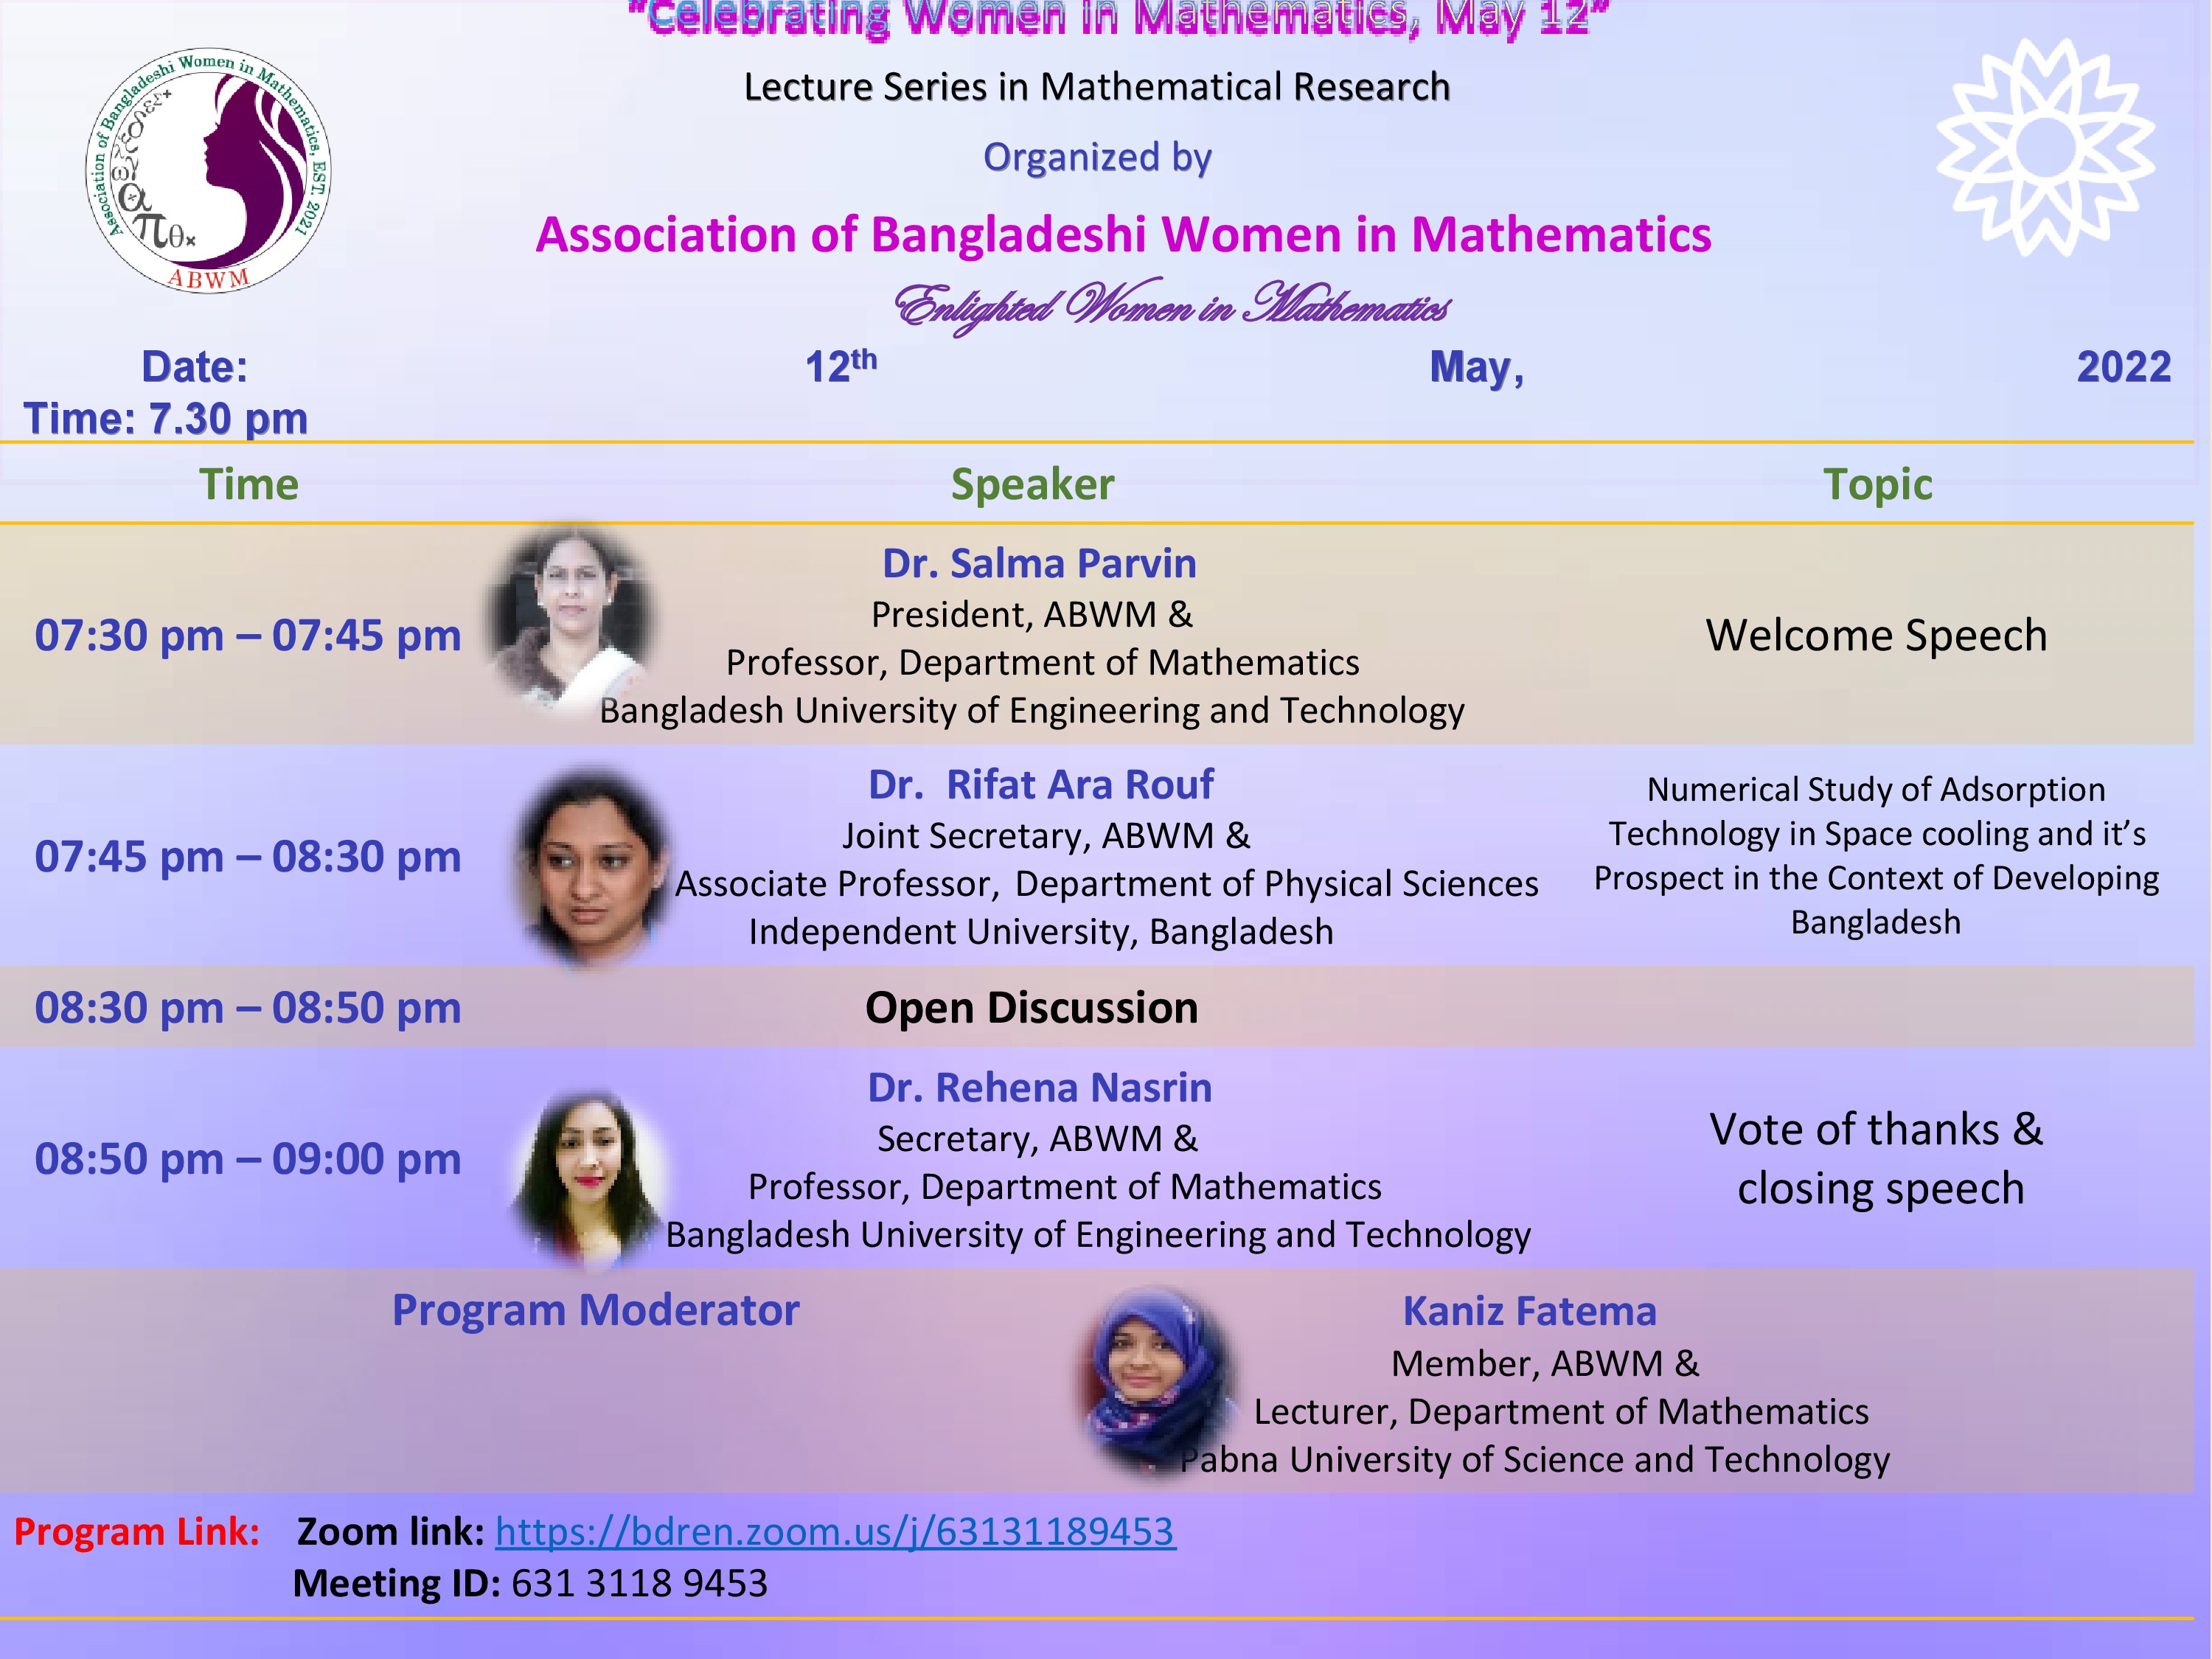 A virtual event titled "Celebrating Women in Mathematics, May 12” will be organized by  the  Association of Bangladeshi Women in Mathematics. The slogan of this association is "Enlighted Women in Mathematics".  The second lecture will be delivered in the "Lecture Series in Mathematical Research" in this event.                               